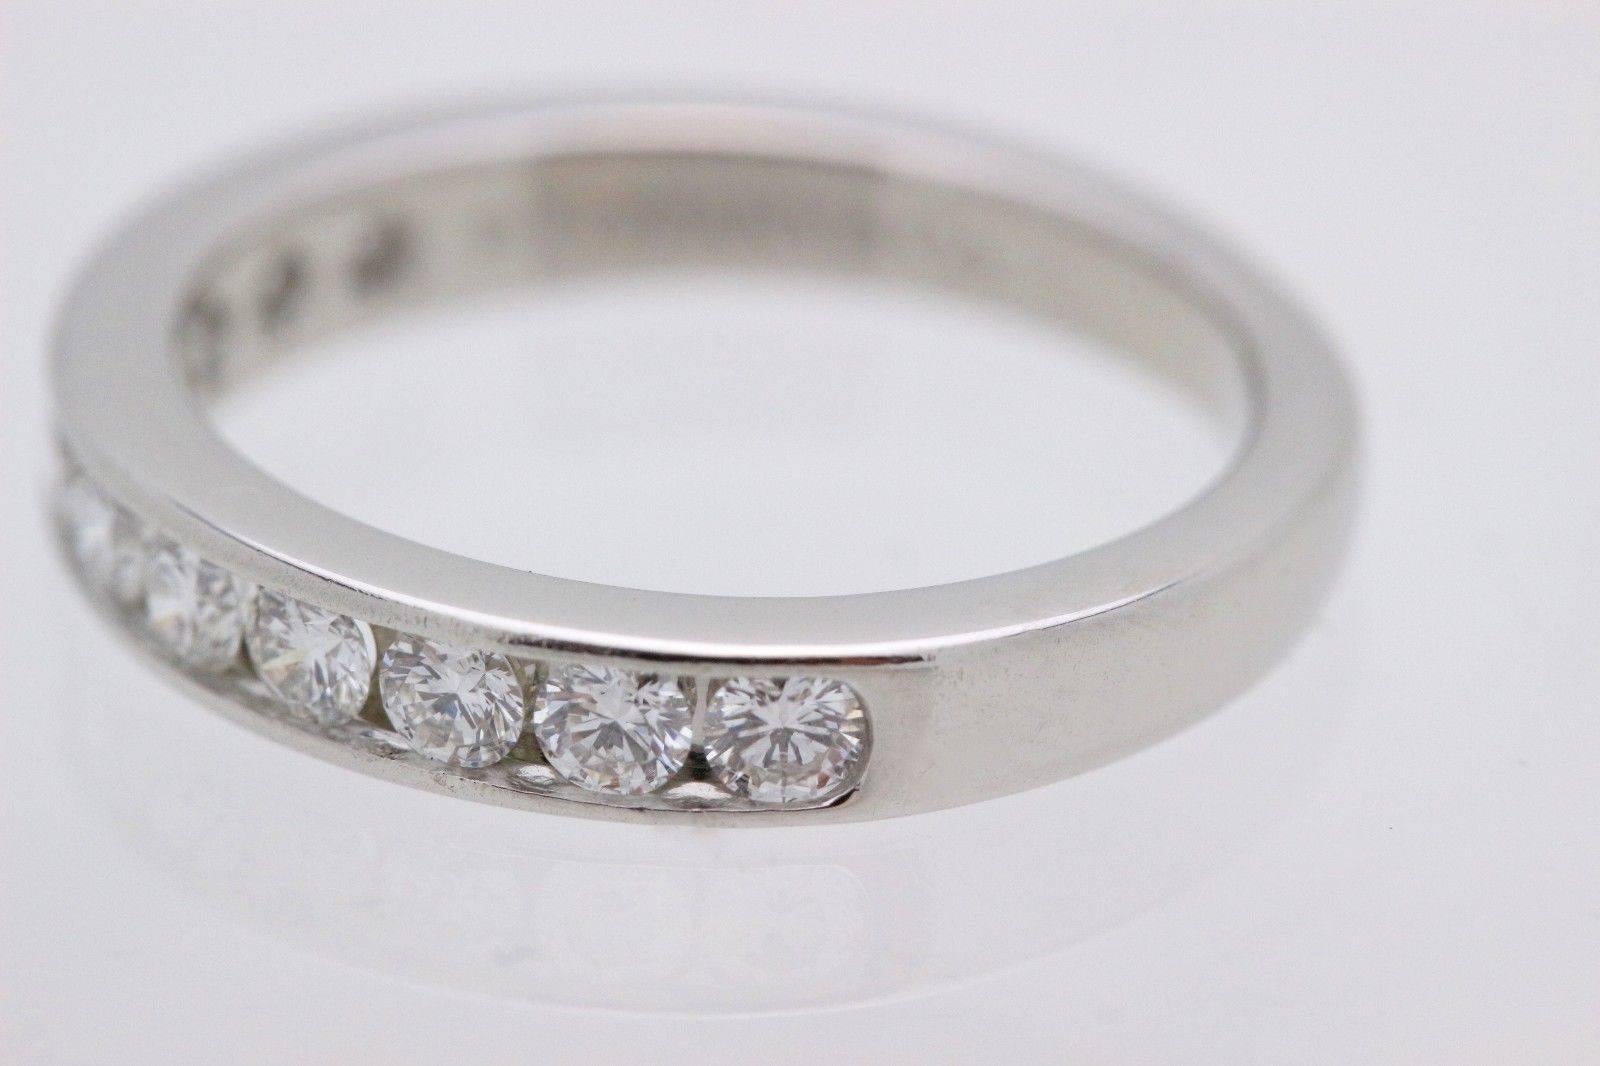 Tiffany & Co. Round Brilliant Diamond Wedding Band Ring Platinum 2.5 MM In Excellent Condition For Sale In San Diego, CA